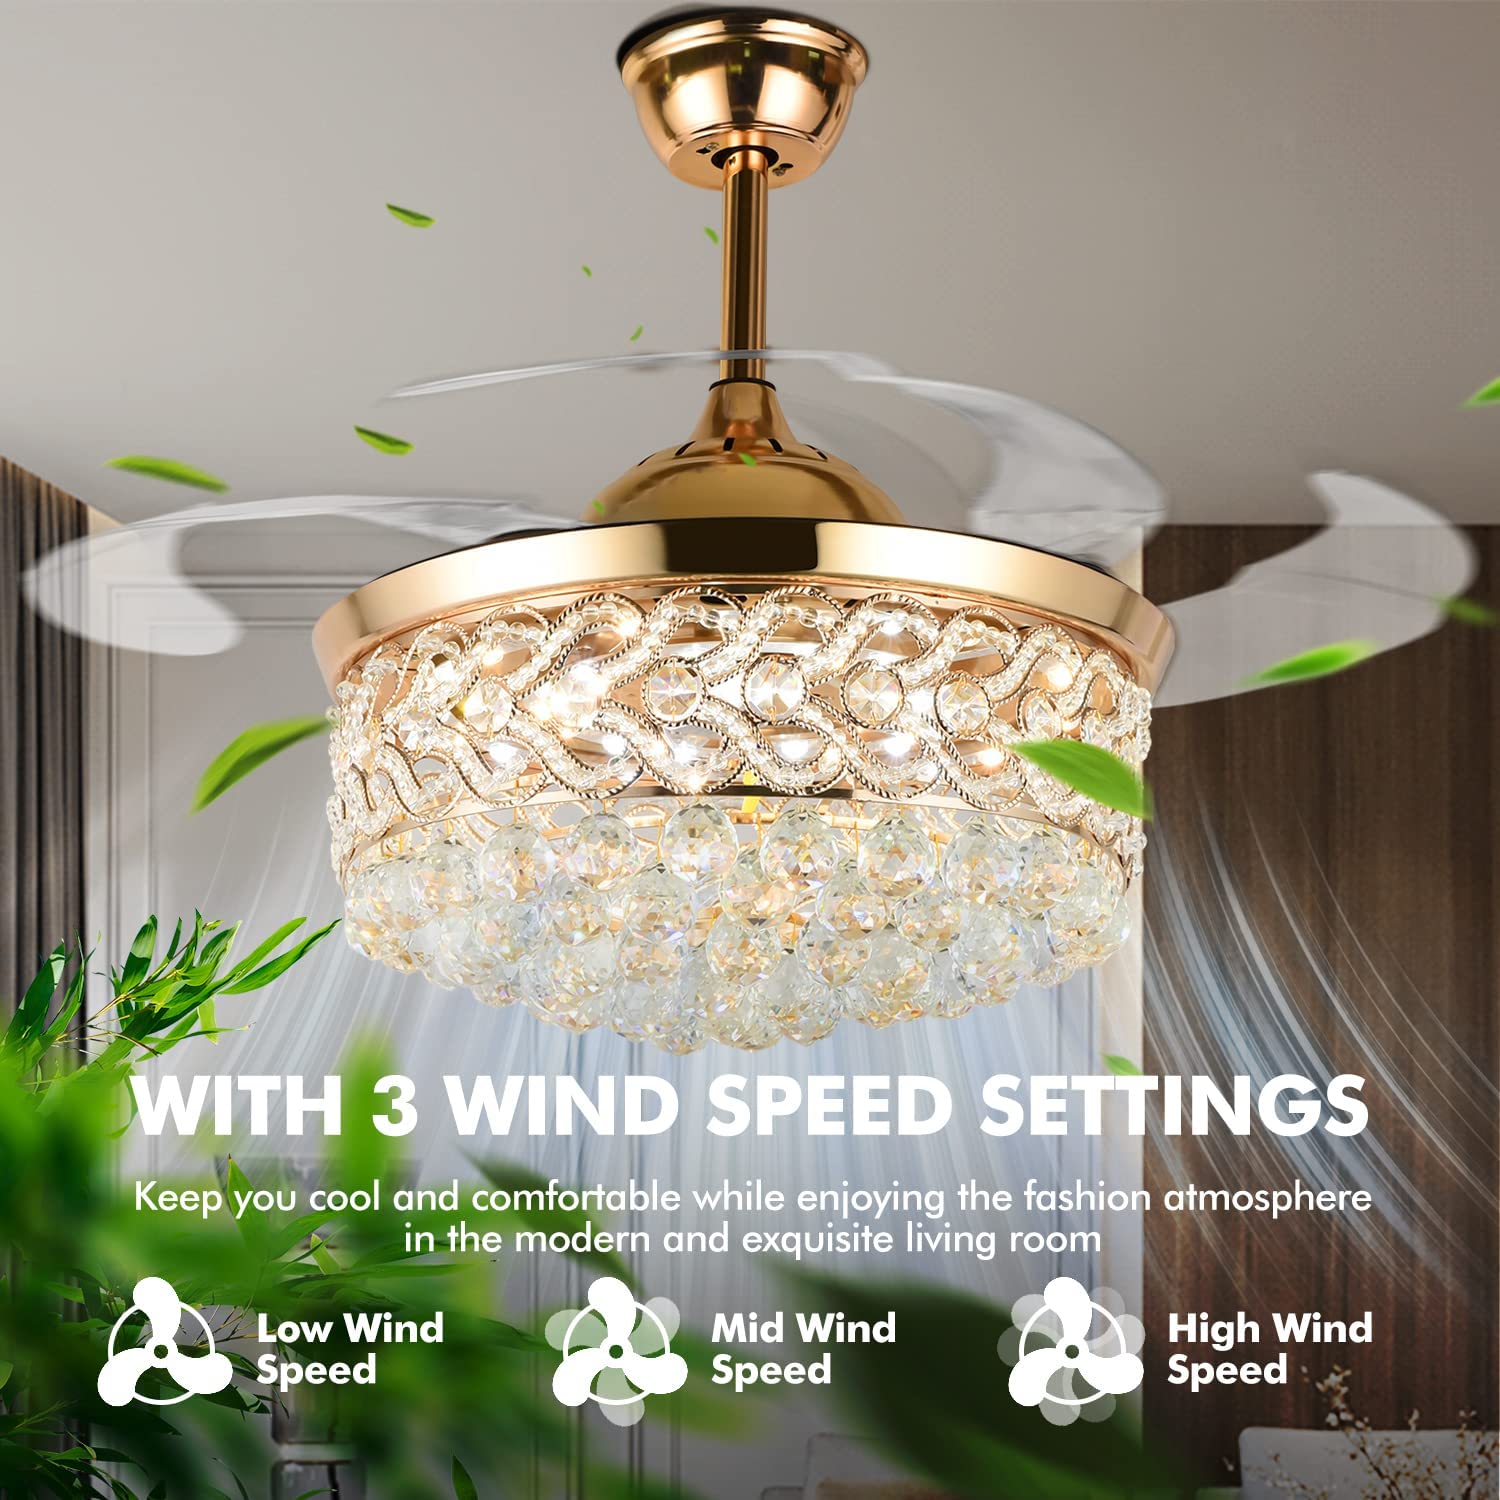 Chandelier Ceiling Fan with LED Light and 4 Acrylic Blades - 42 Inch